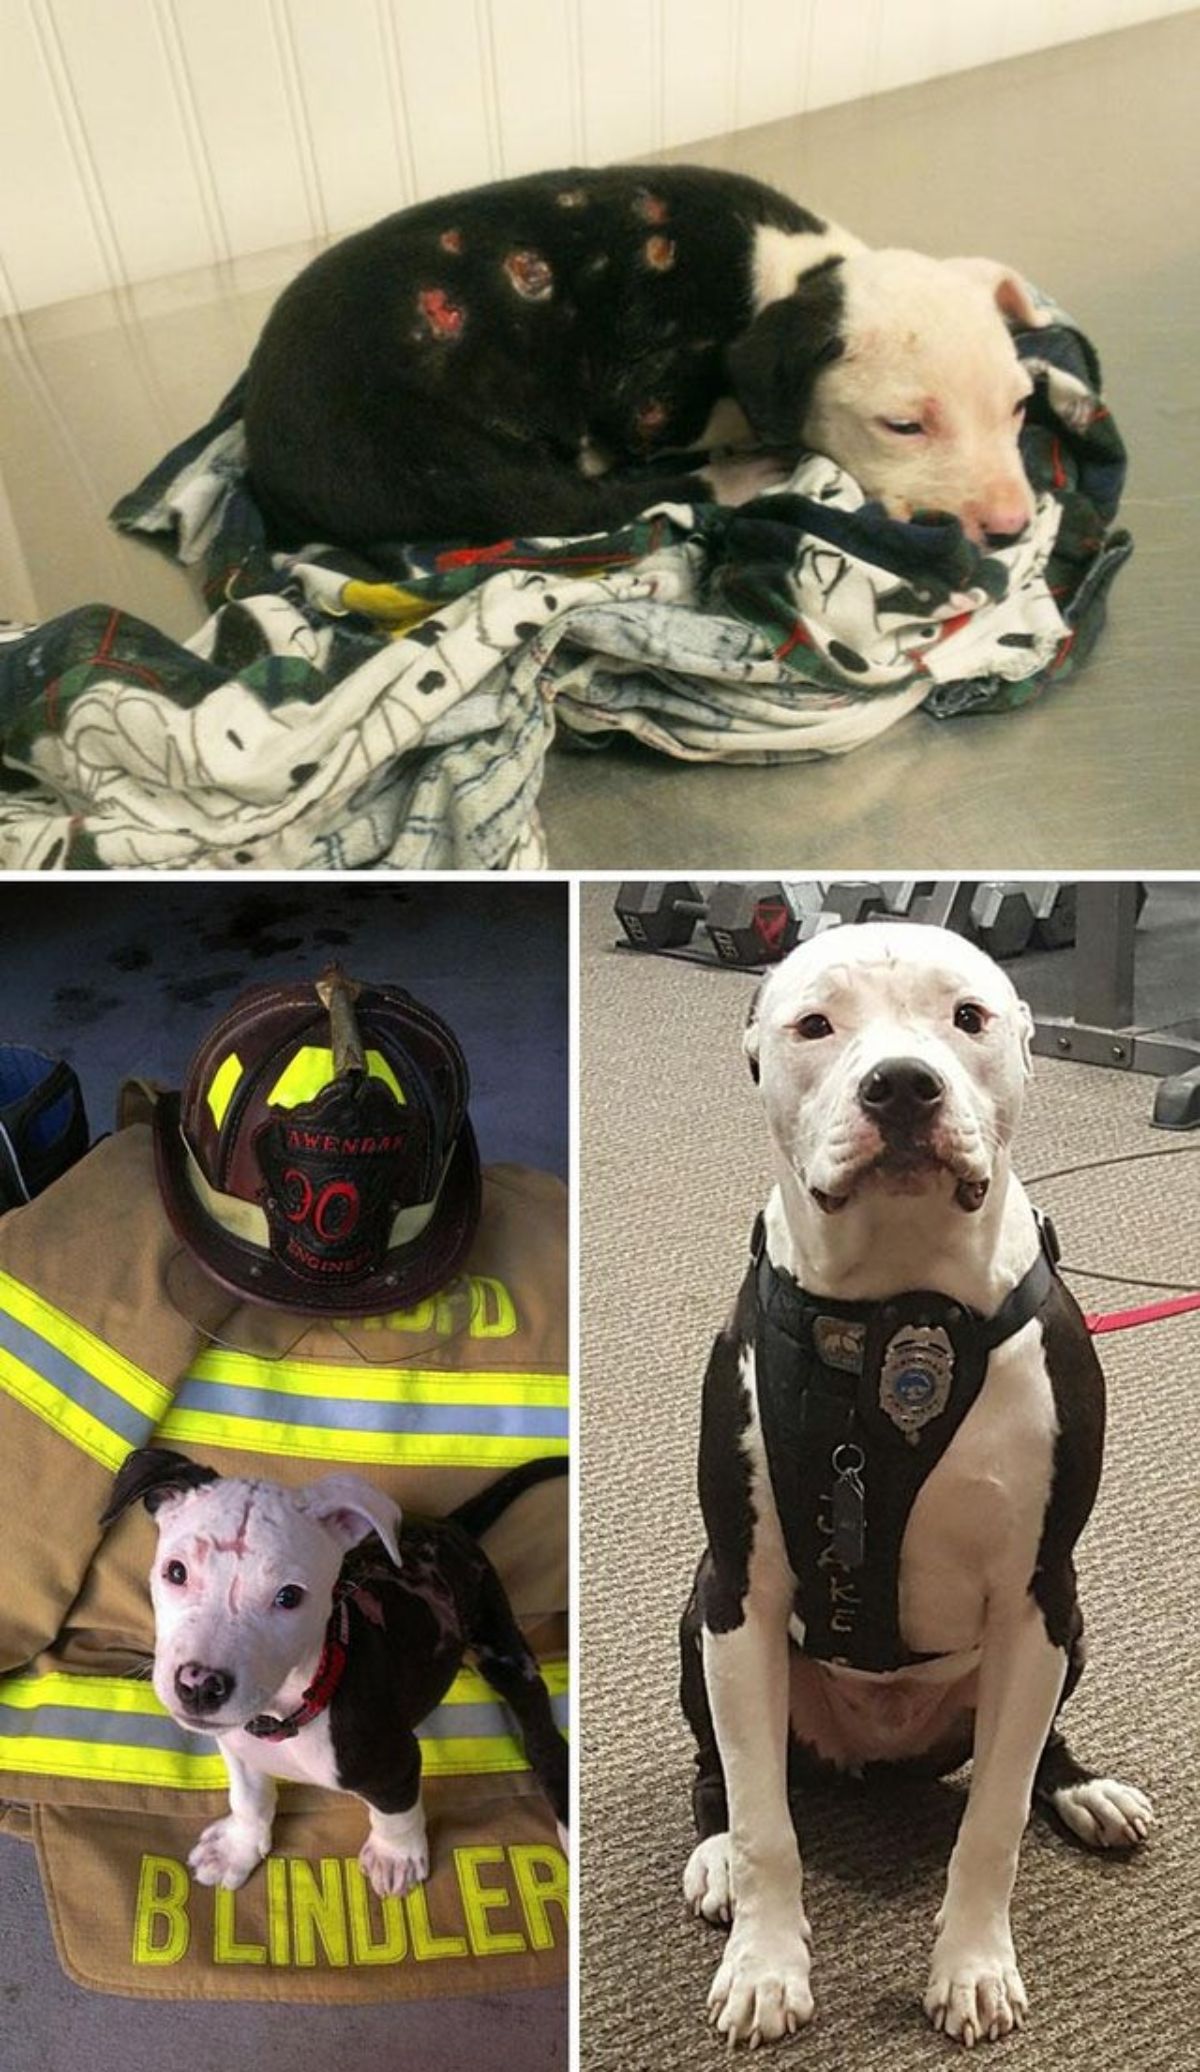 2 photos of a black and white injured pitbull and a 3rd photo of the same dog as an adult wearing a black harness with a firefighter badge